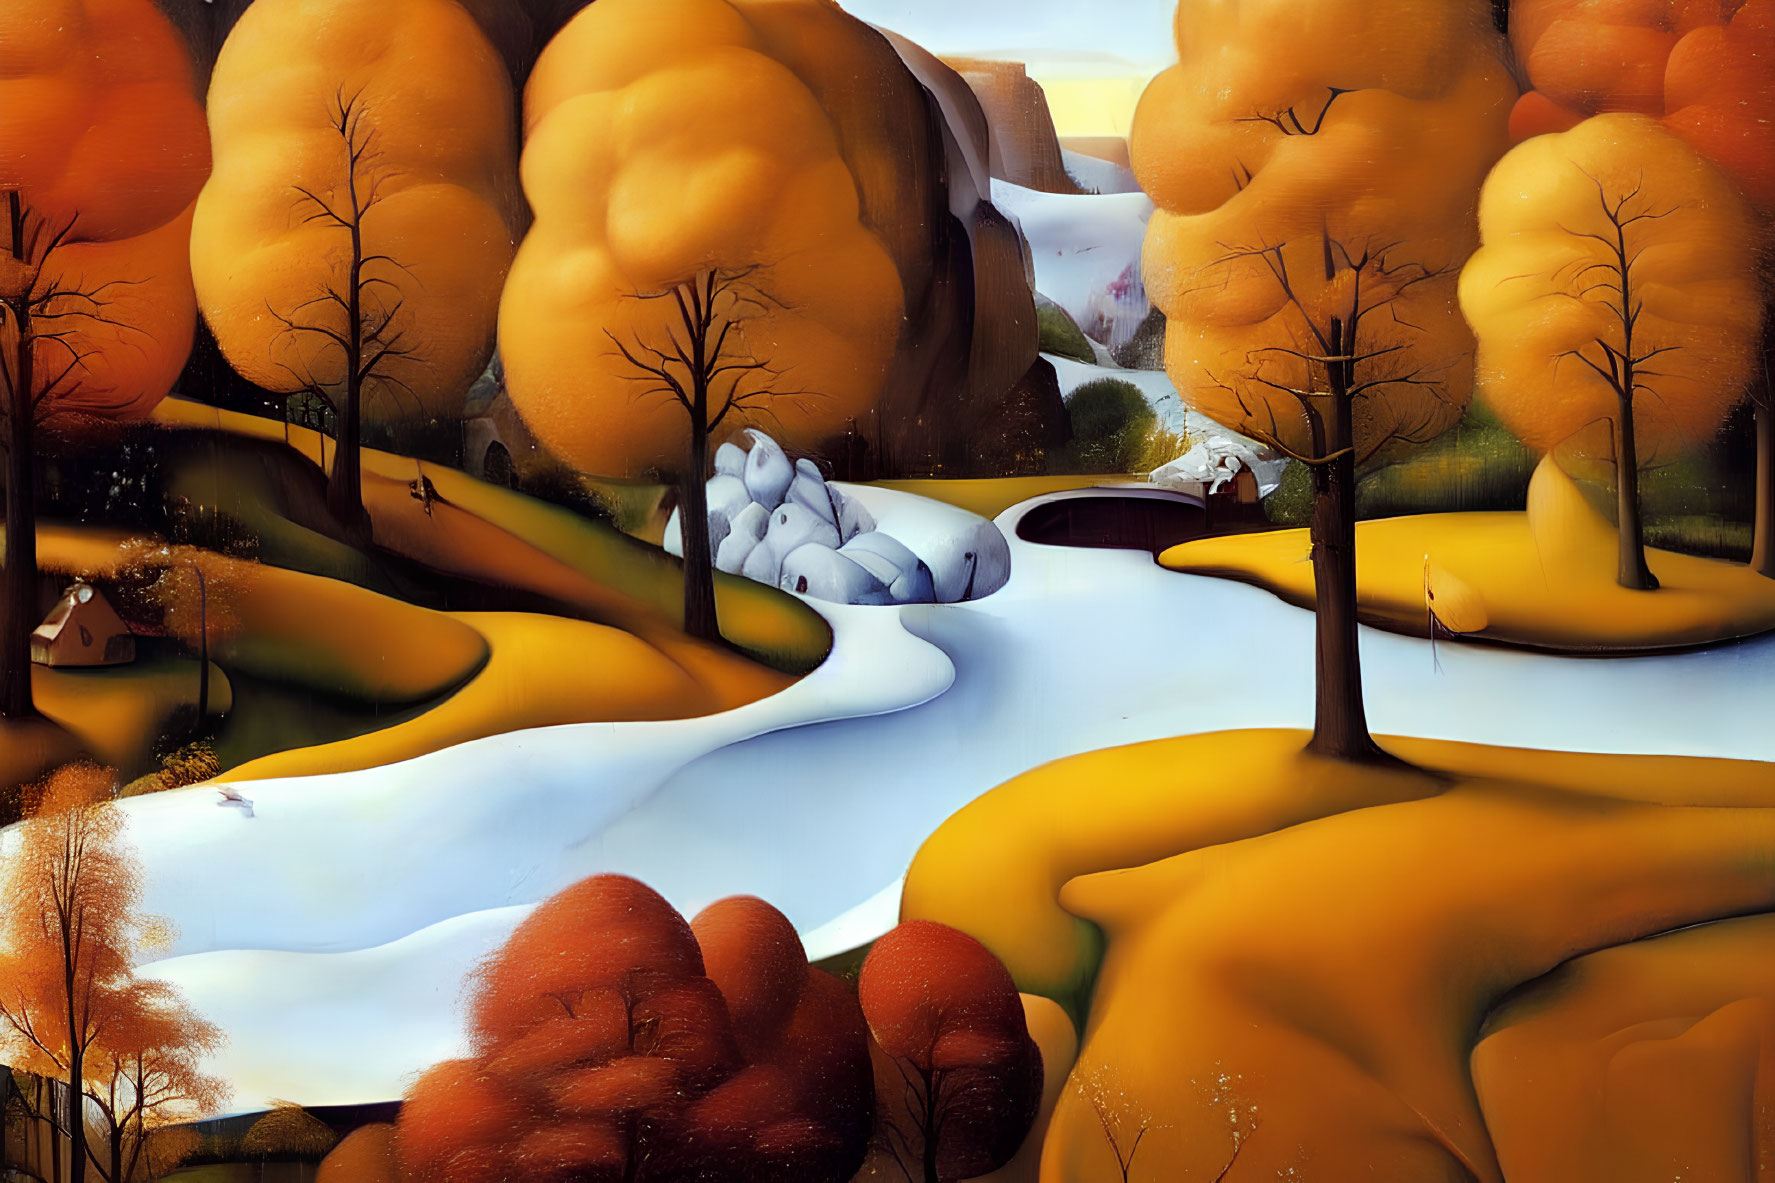 Stylized landscape painting of rolling hills, river, and autumn trees